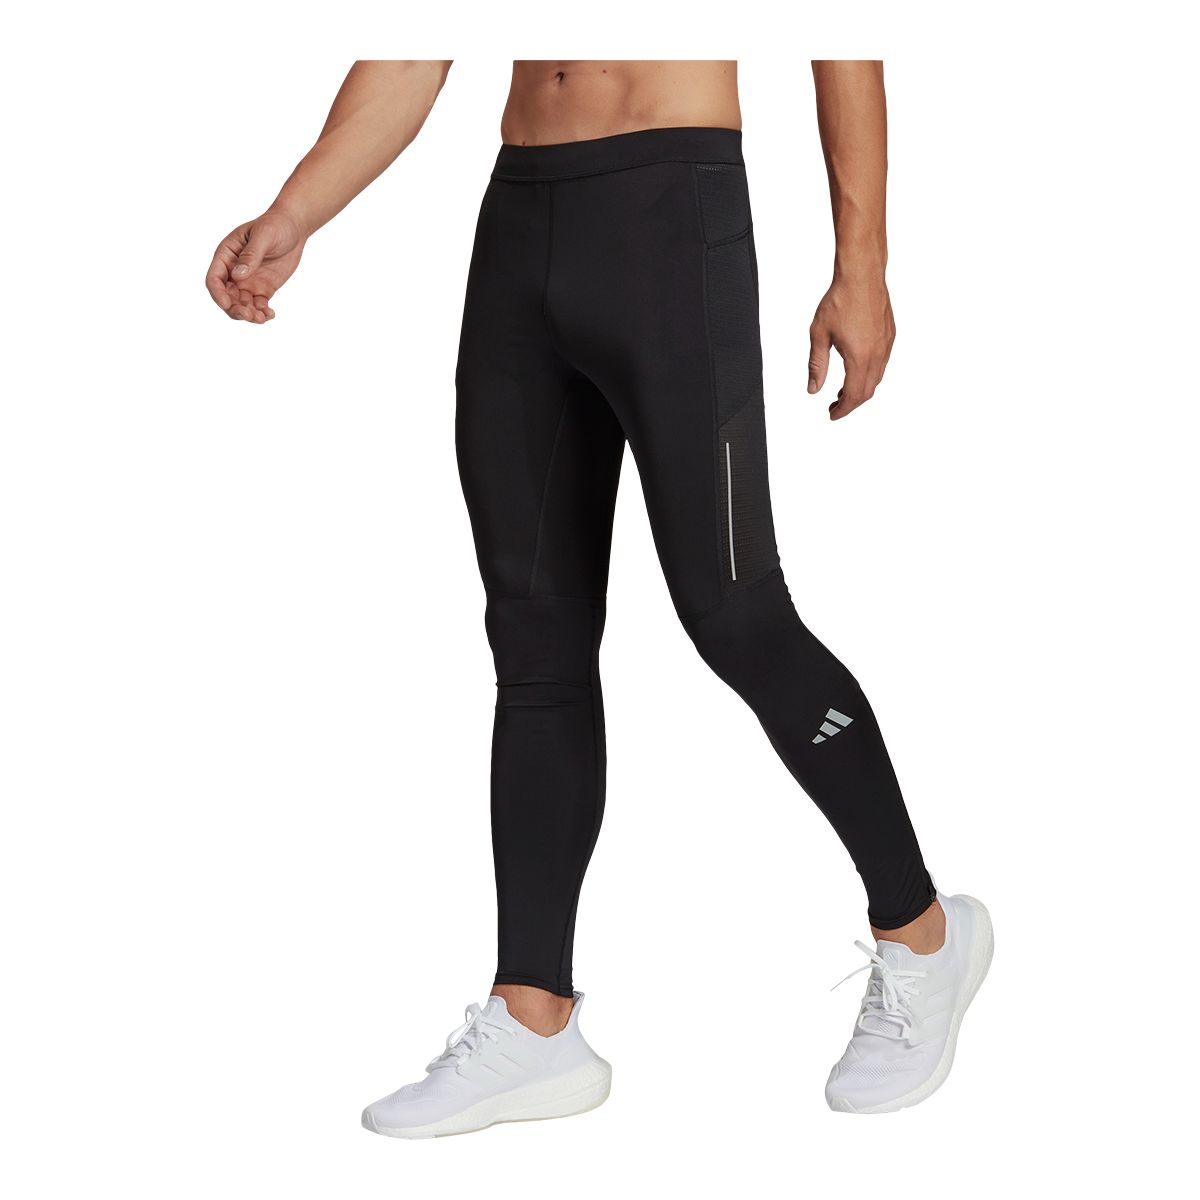 Image of adidas Men's Own The Run Tights